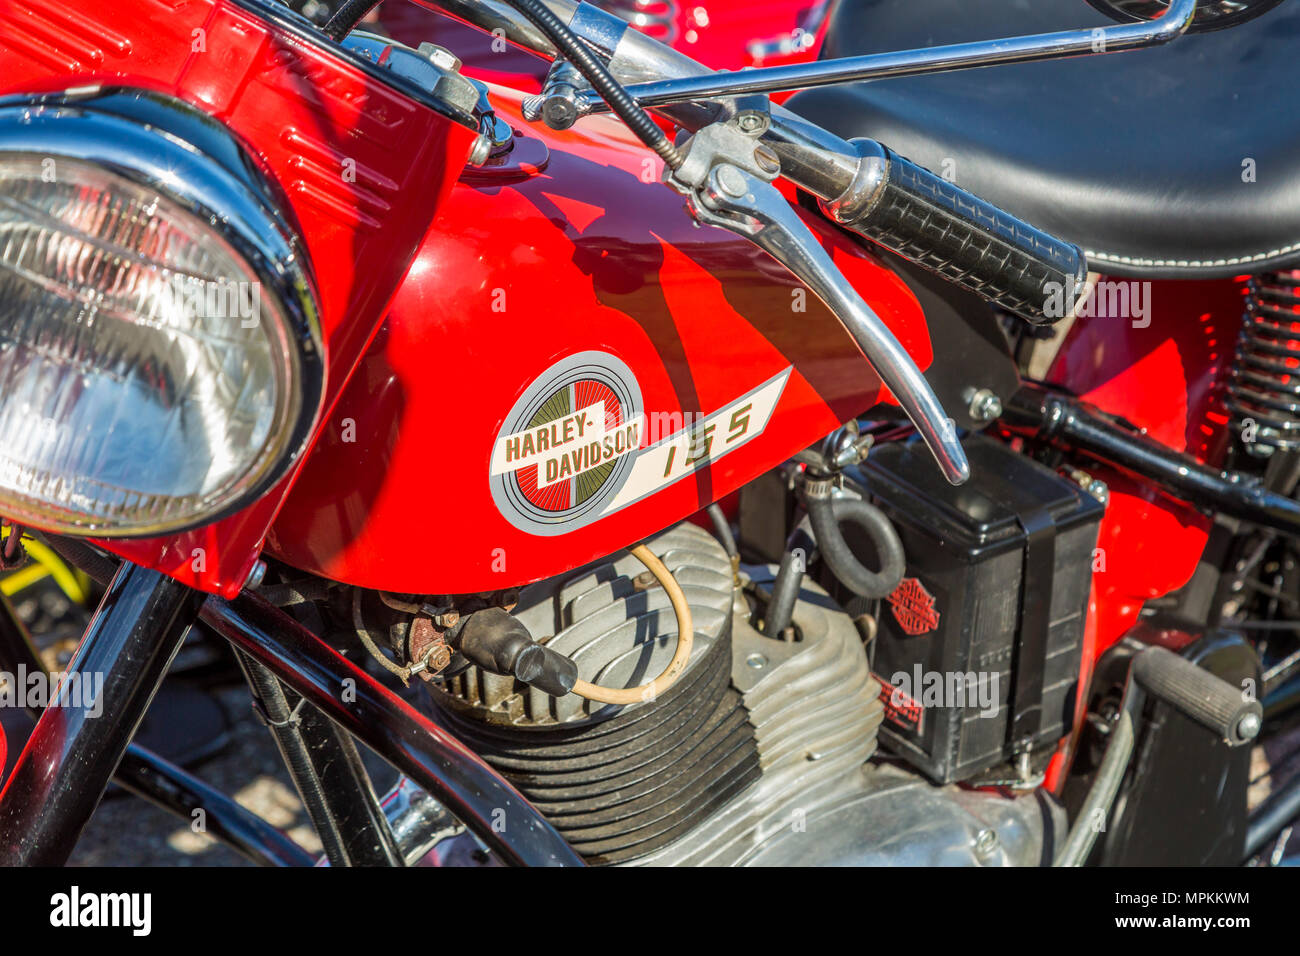 Classic motorcycles in car show to raise funds for mission trips at Crosspoint Church in Gulfport, Mississippi Stock Photo